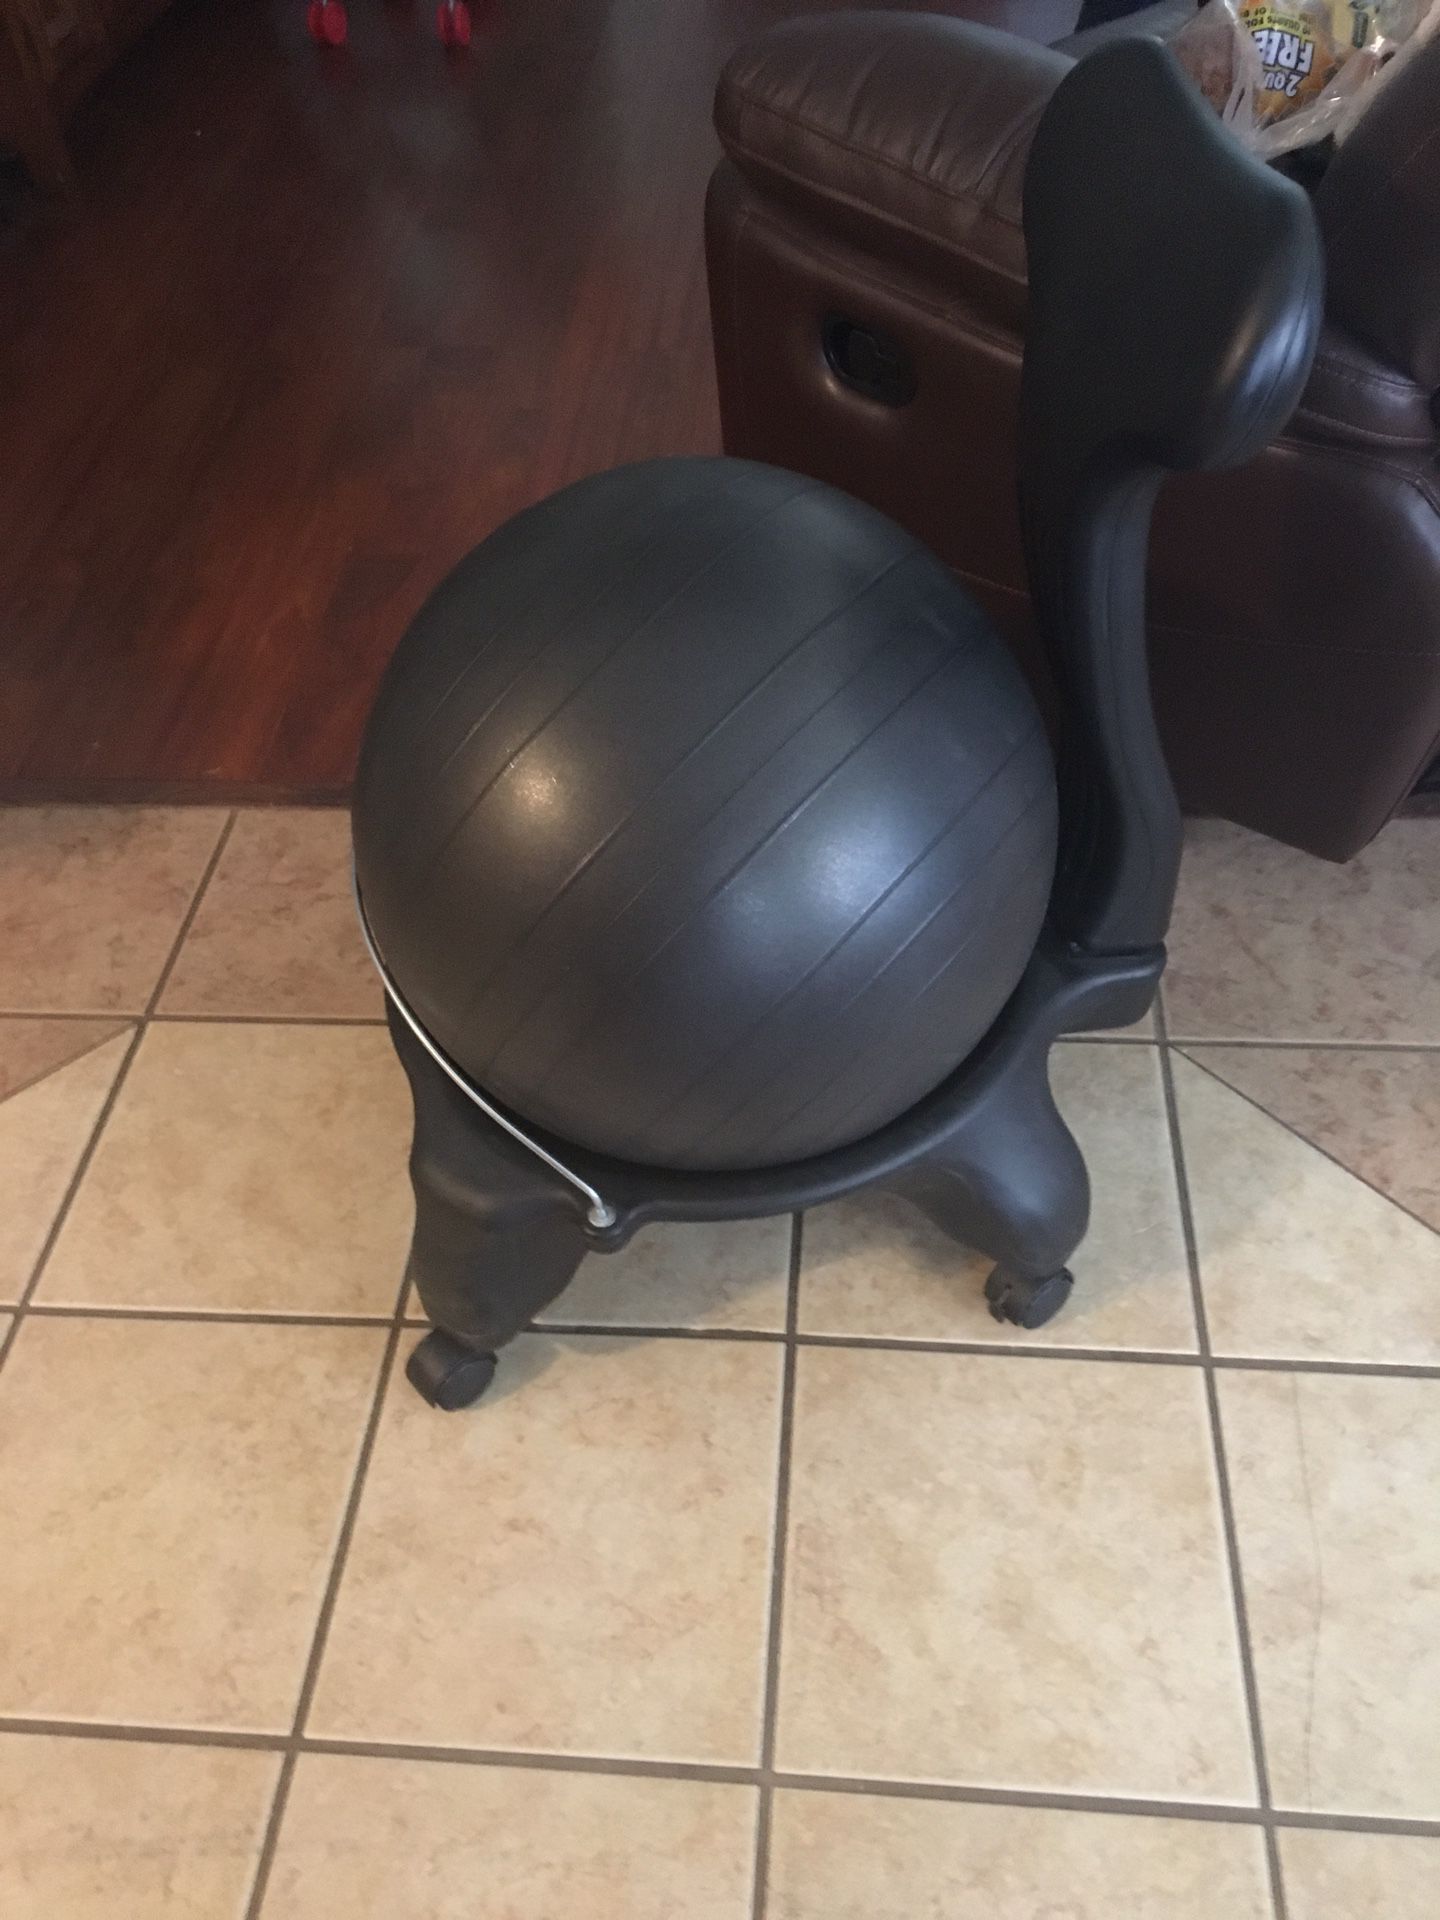 Computer chair with exercise ball